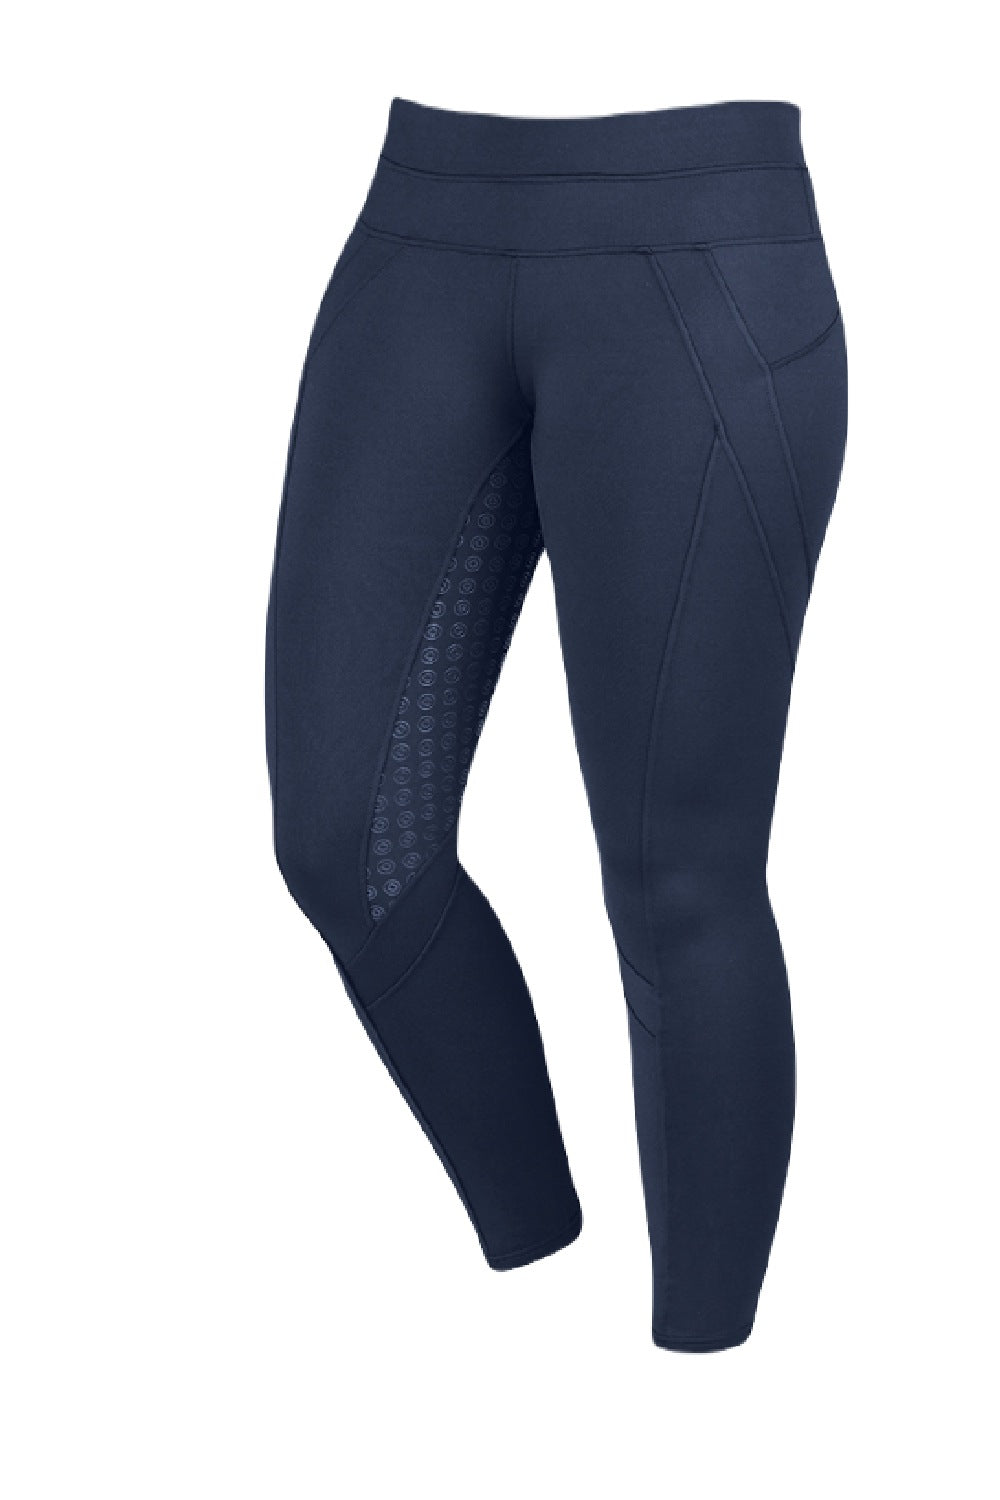 Dublin Performance Thermal Active Tights in Navy 